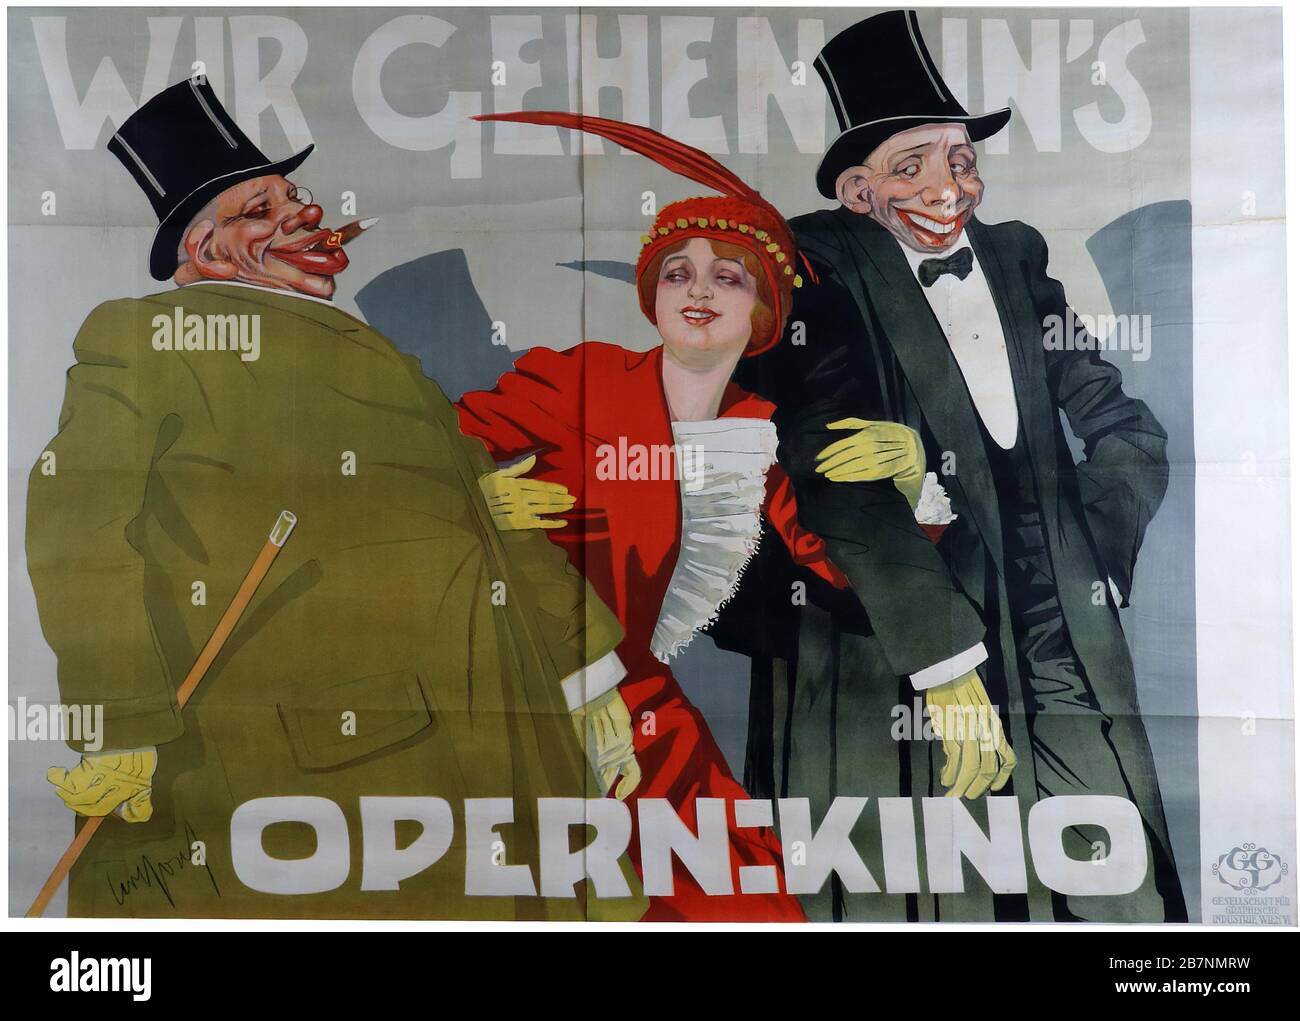 WIR gehen ins Opernkino, c. 1905. Collection privée. Banque D'Images